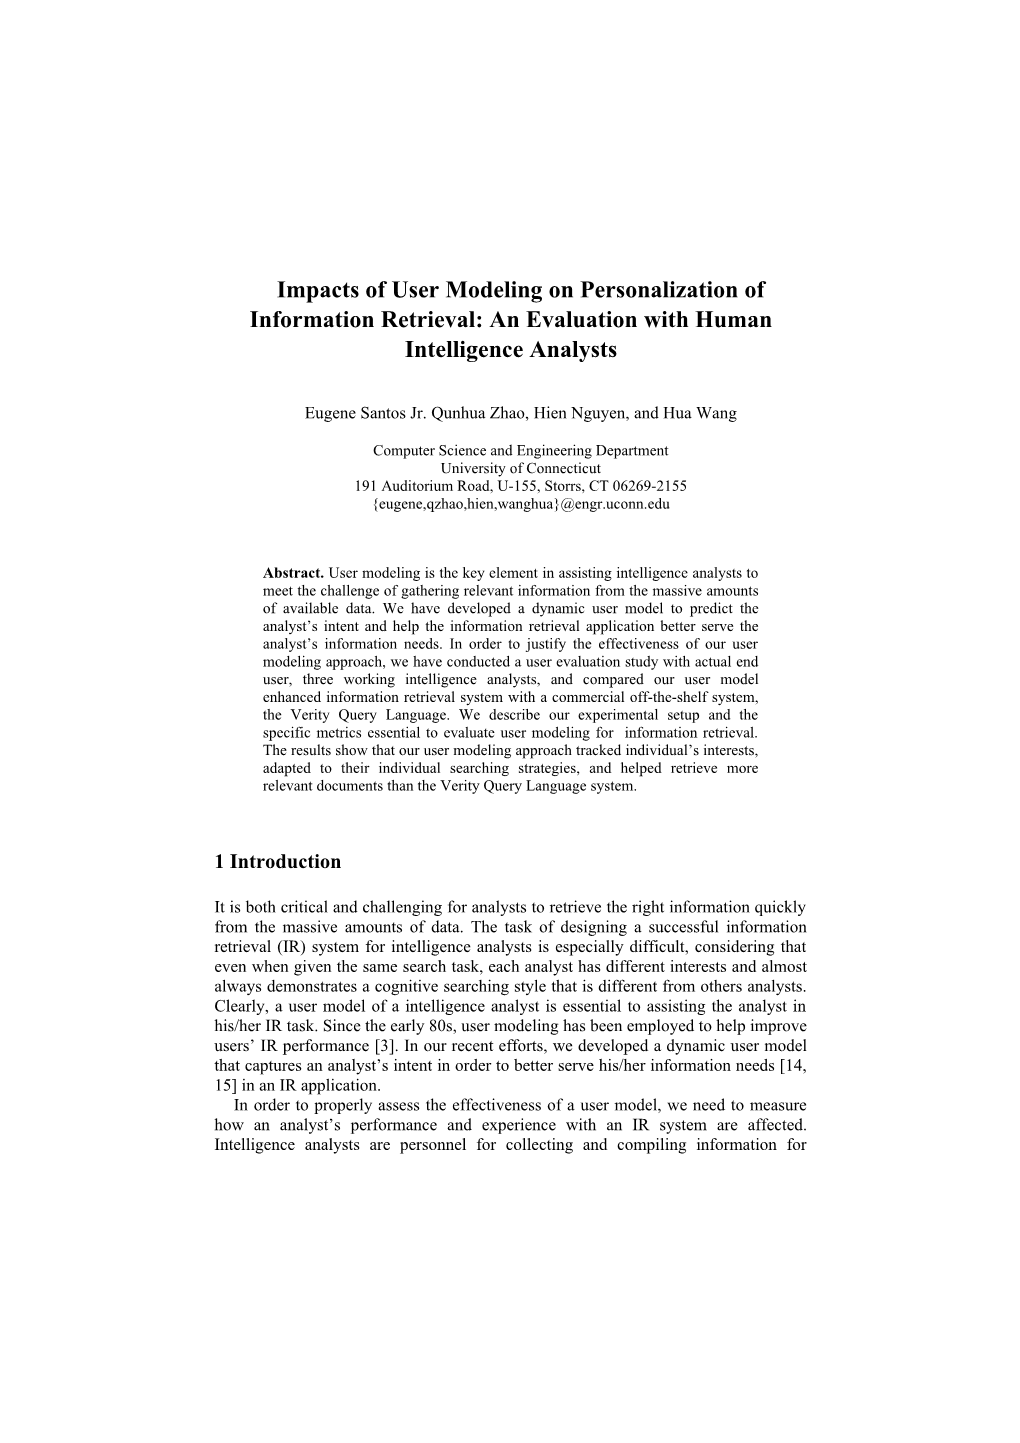 Impacts of User Modeling on Personalization of Information Retrieval: an Evaluation With